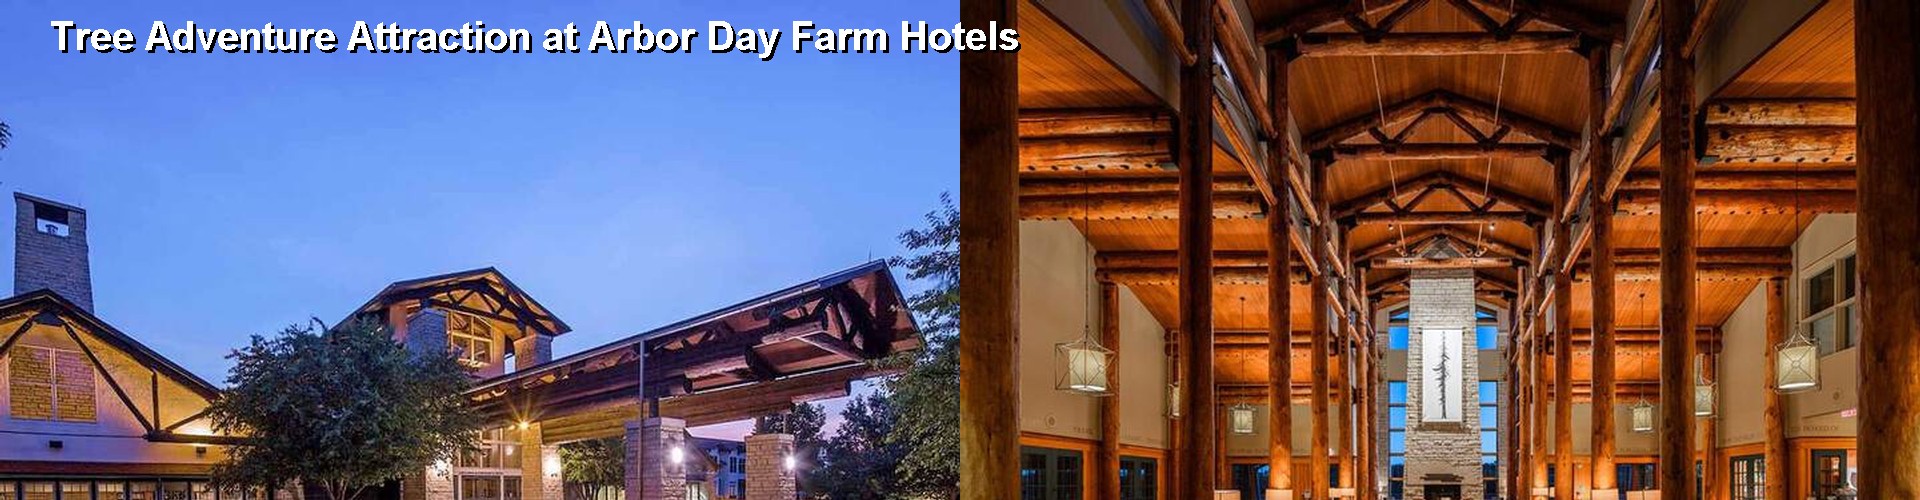 4 Best Hotels near Tree Adventure Attraction at Arbor Day Farm